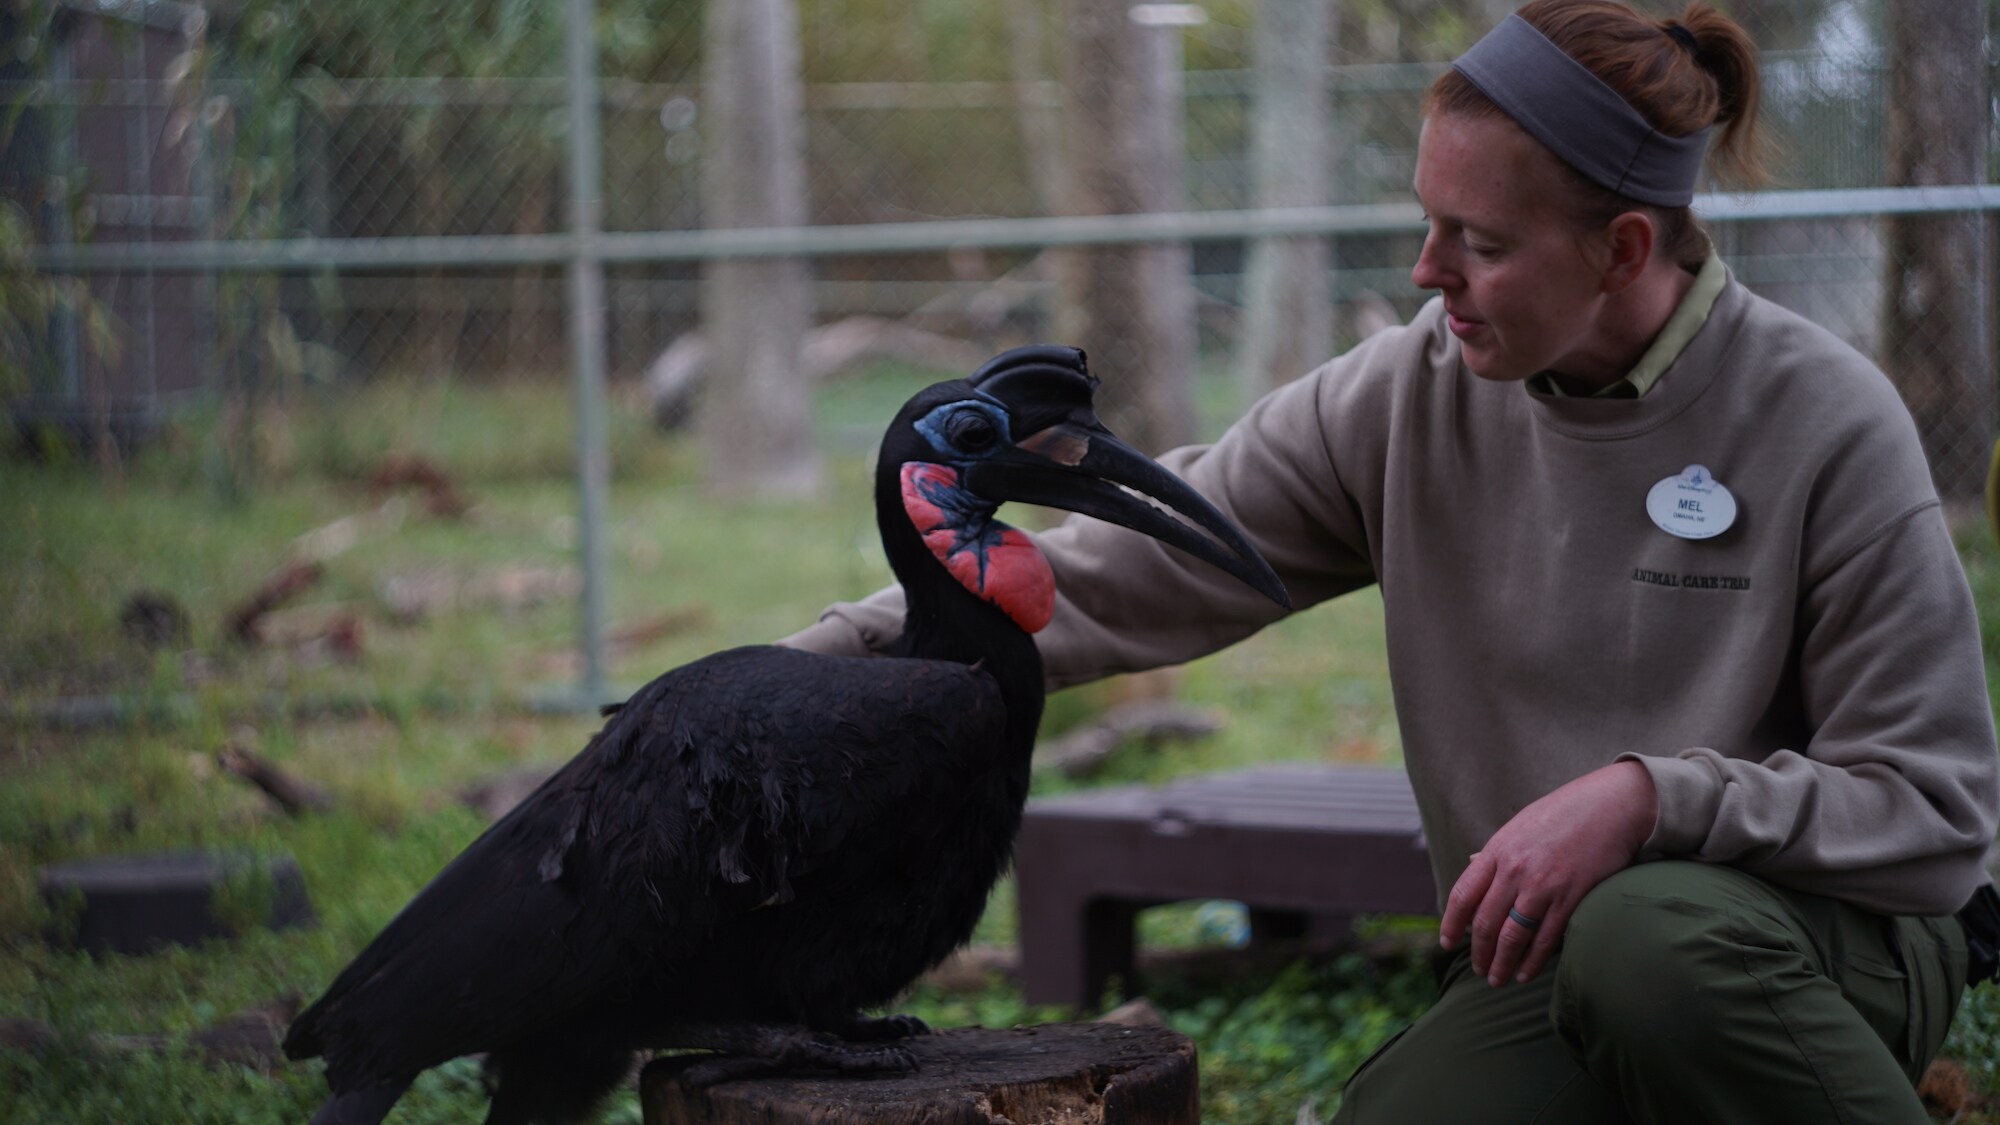 Cassanova, the 23-year-old Abyssinian Ground Hornbill, interacting at Lodge Savannah. Cassanova is very interested in the camera crew and runs immediately towards them as he is let out of the barn.(Disney)